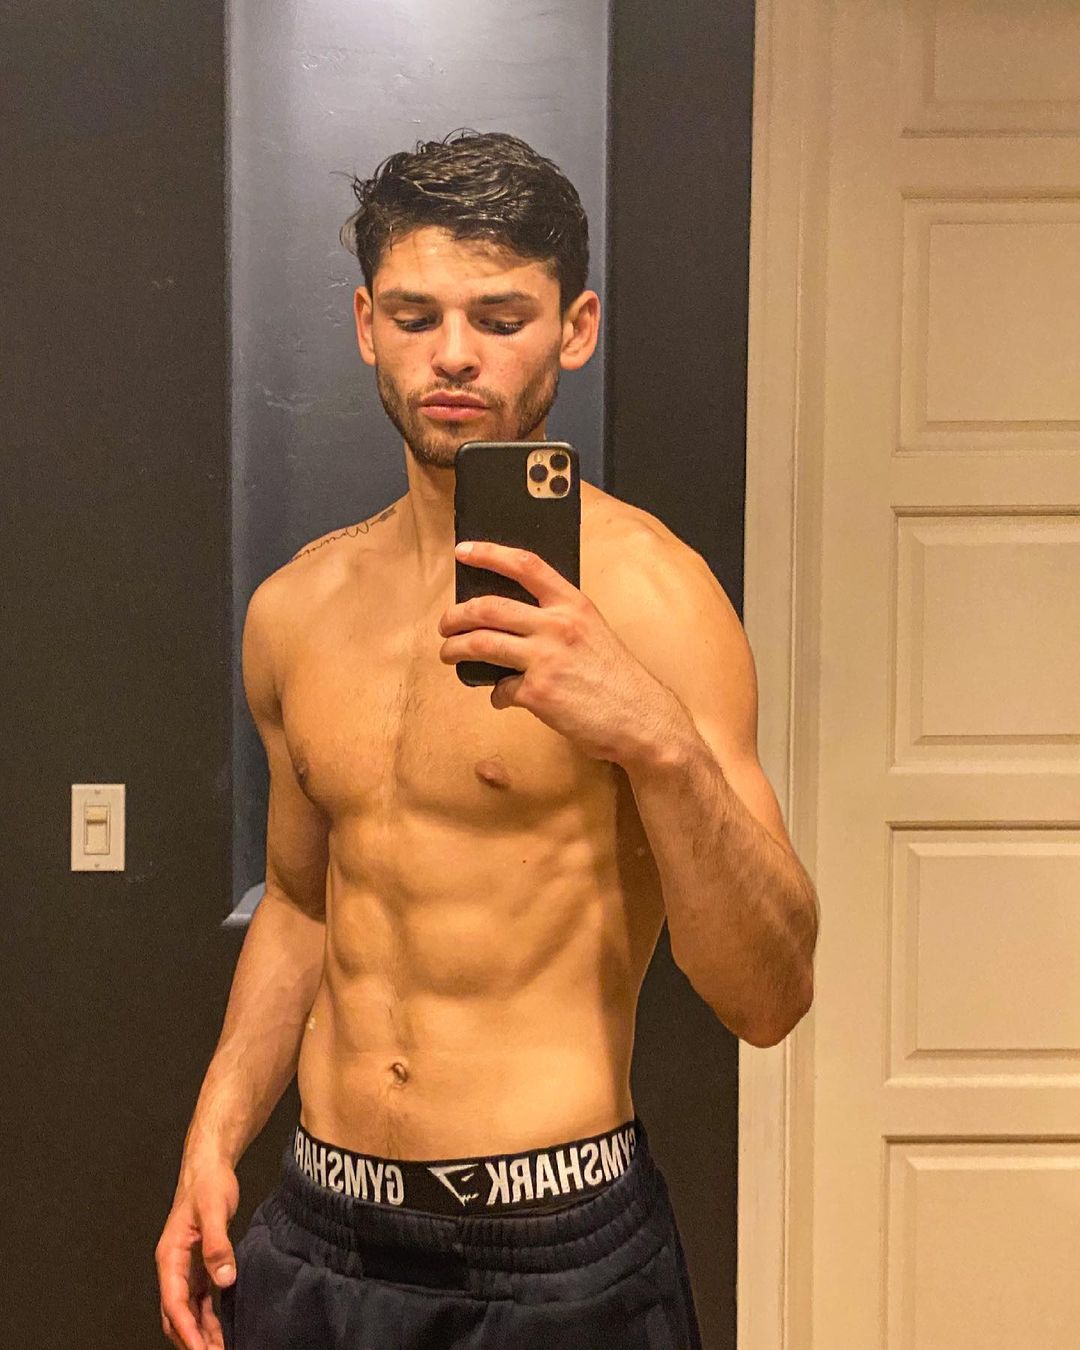 Ryan Garcia, unbeaten boxer, shows off his dramatic body transformation against Javier Fortuna in this glamorous life